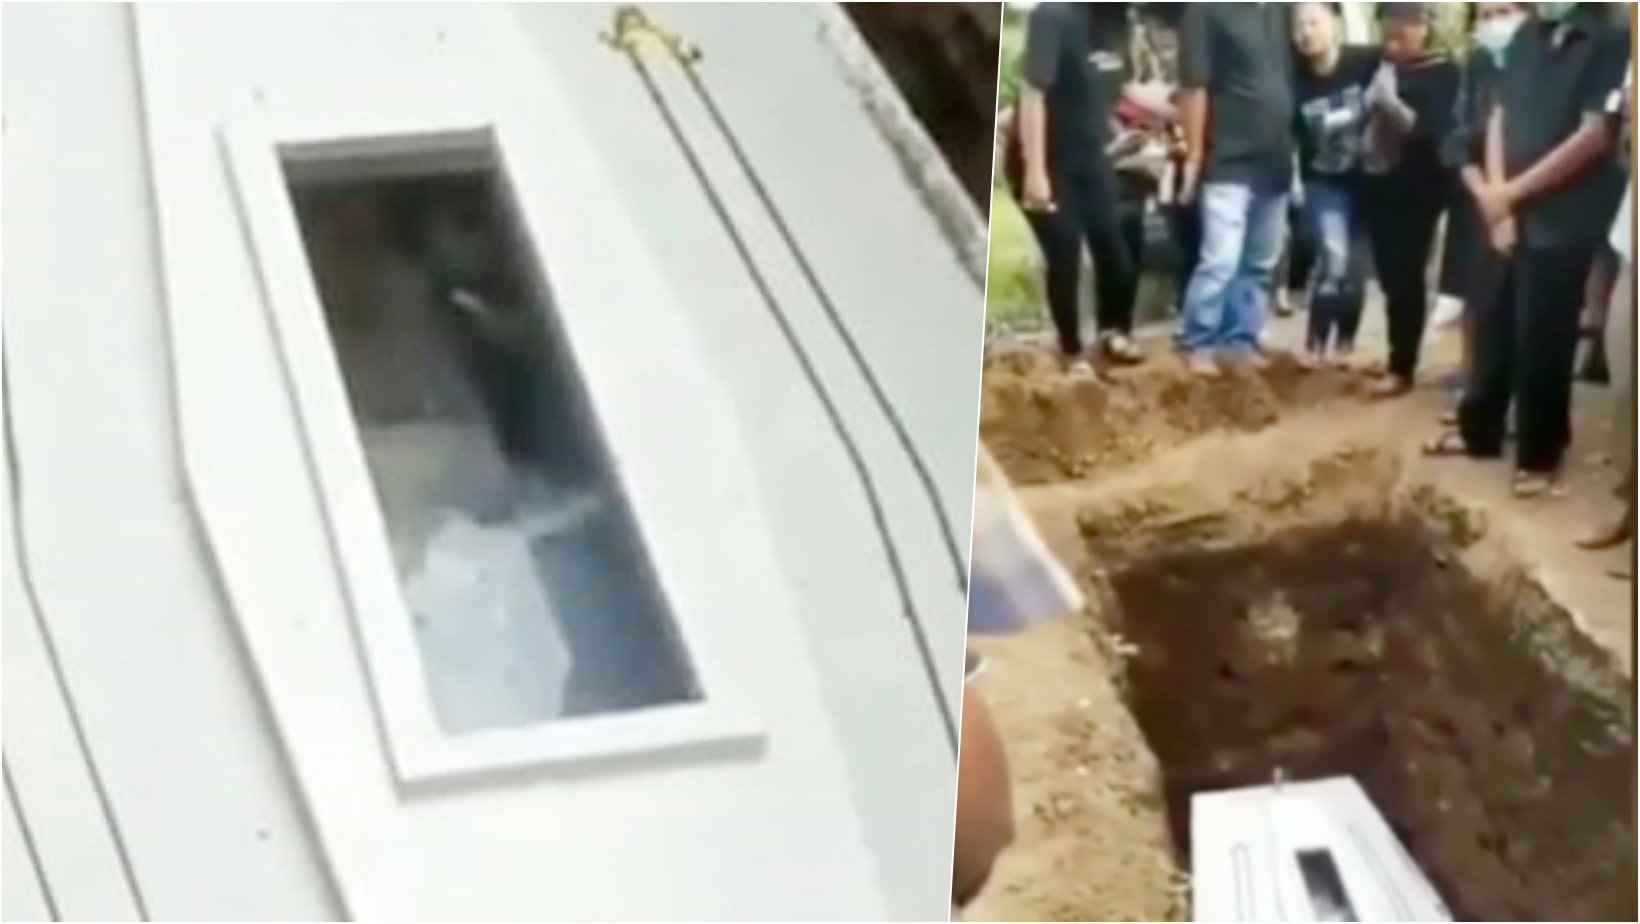 6 facebook cover 4.png?resize=1200,630 - Shocking Moment When Corpse Appears To Wave From Inside The Coffin Was Caught On Camera & Terrified Mourners